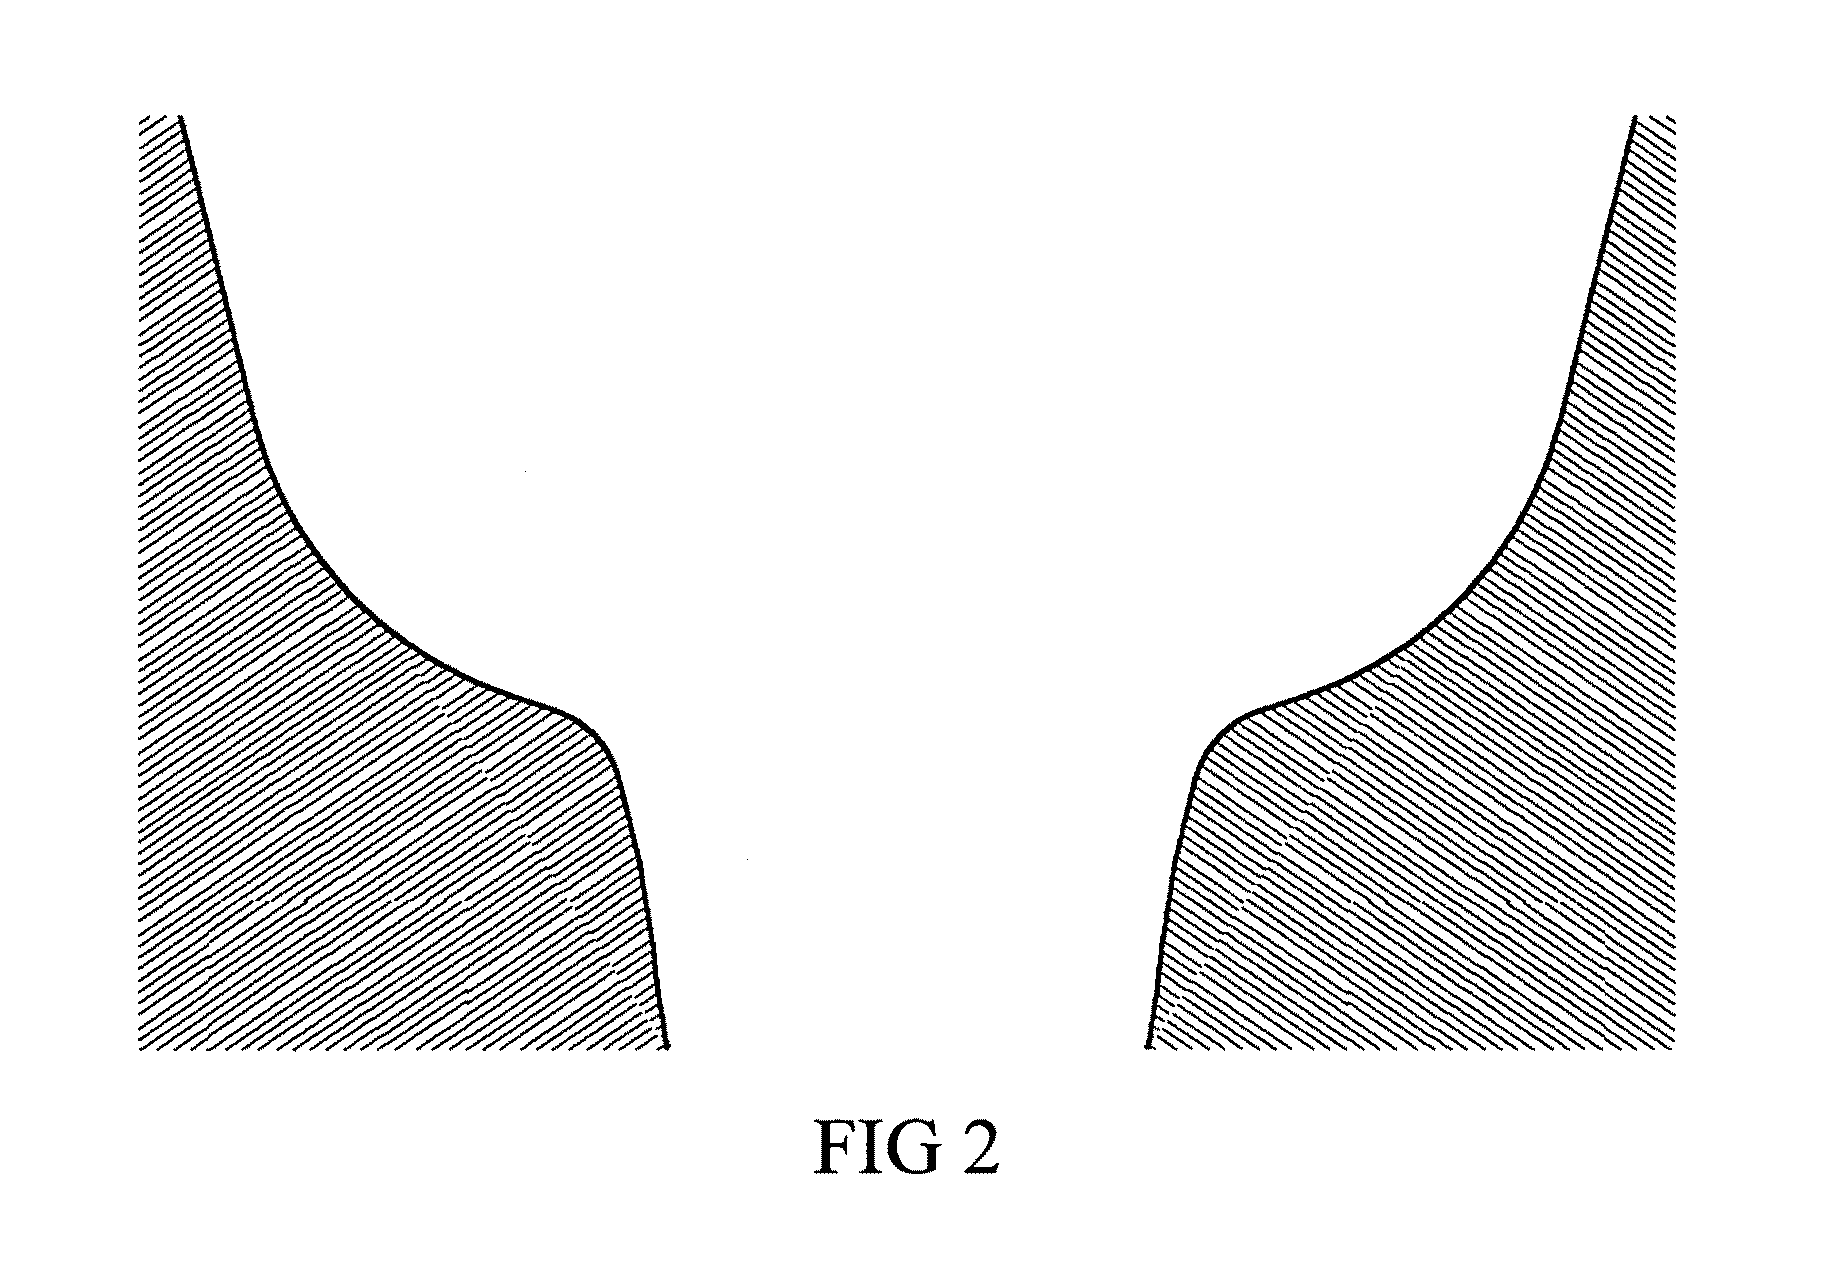 Method and apparatus to sharply focus aerosol particles at high flow rate and over a wide range of sizes